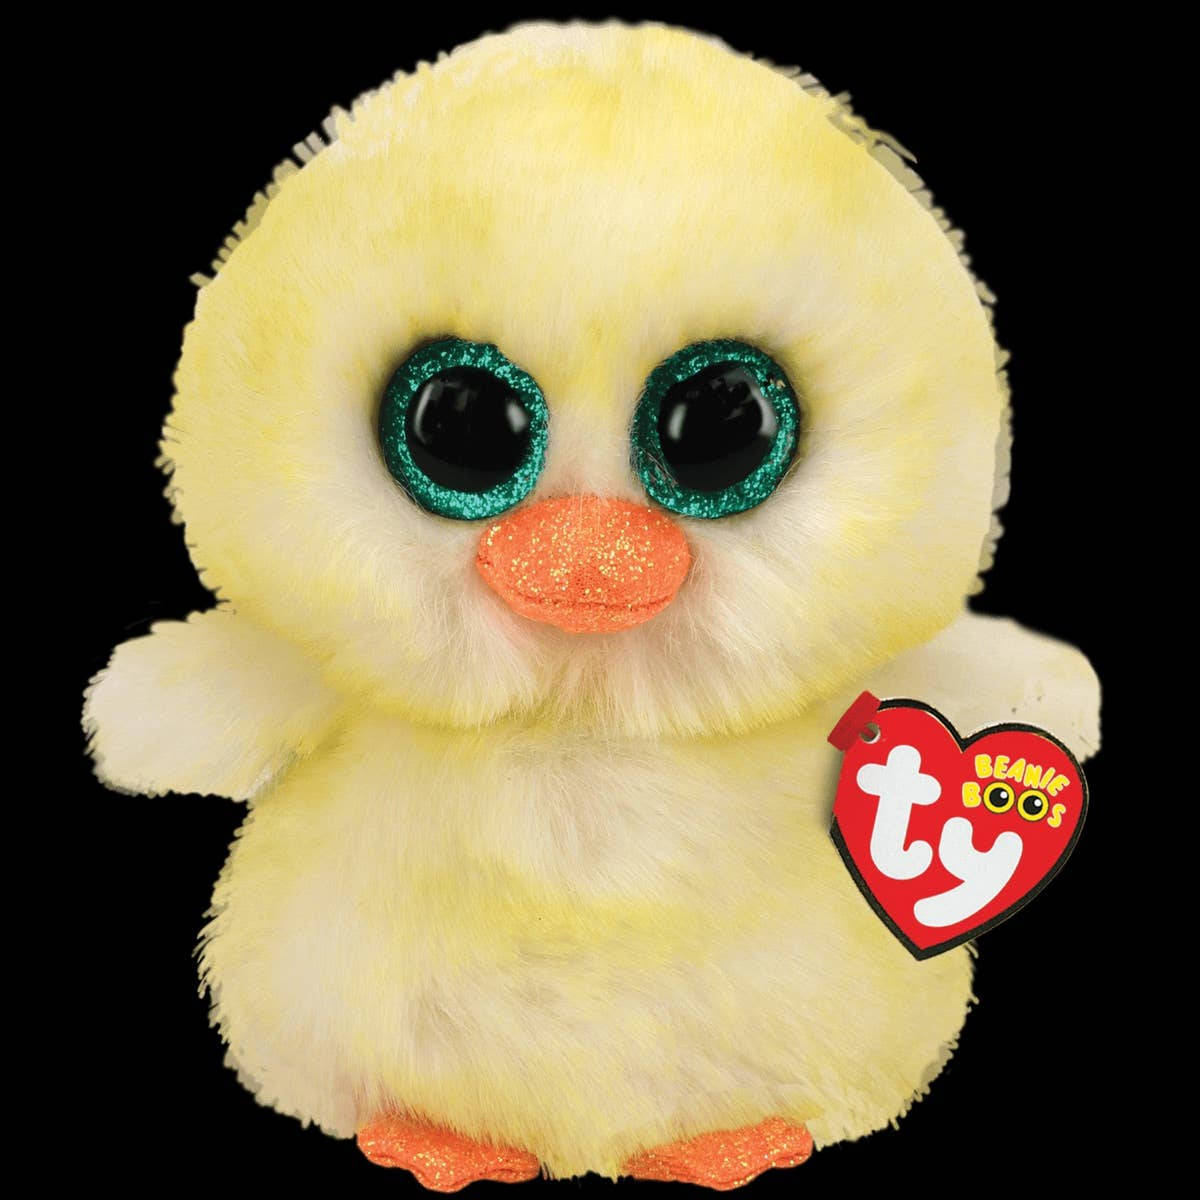 Yellow Chick Beanie Boos Background